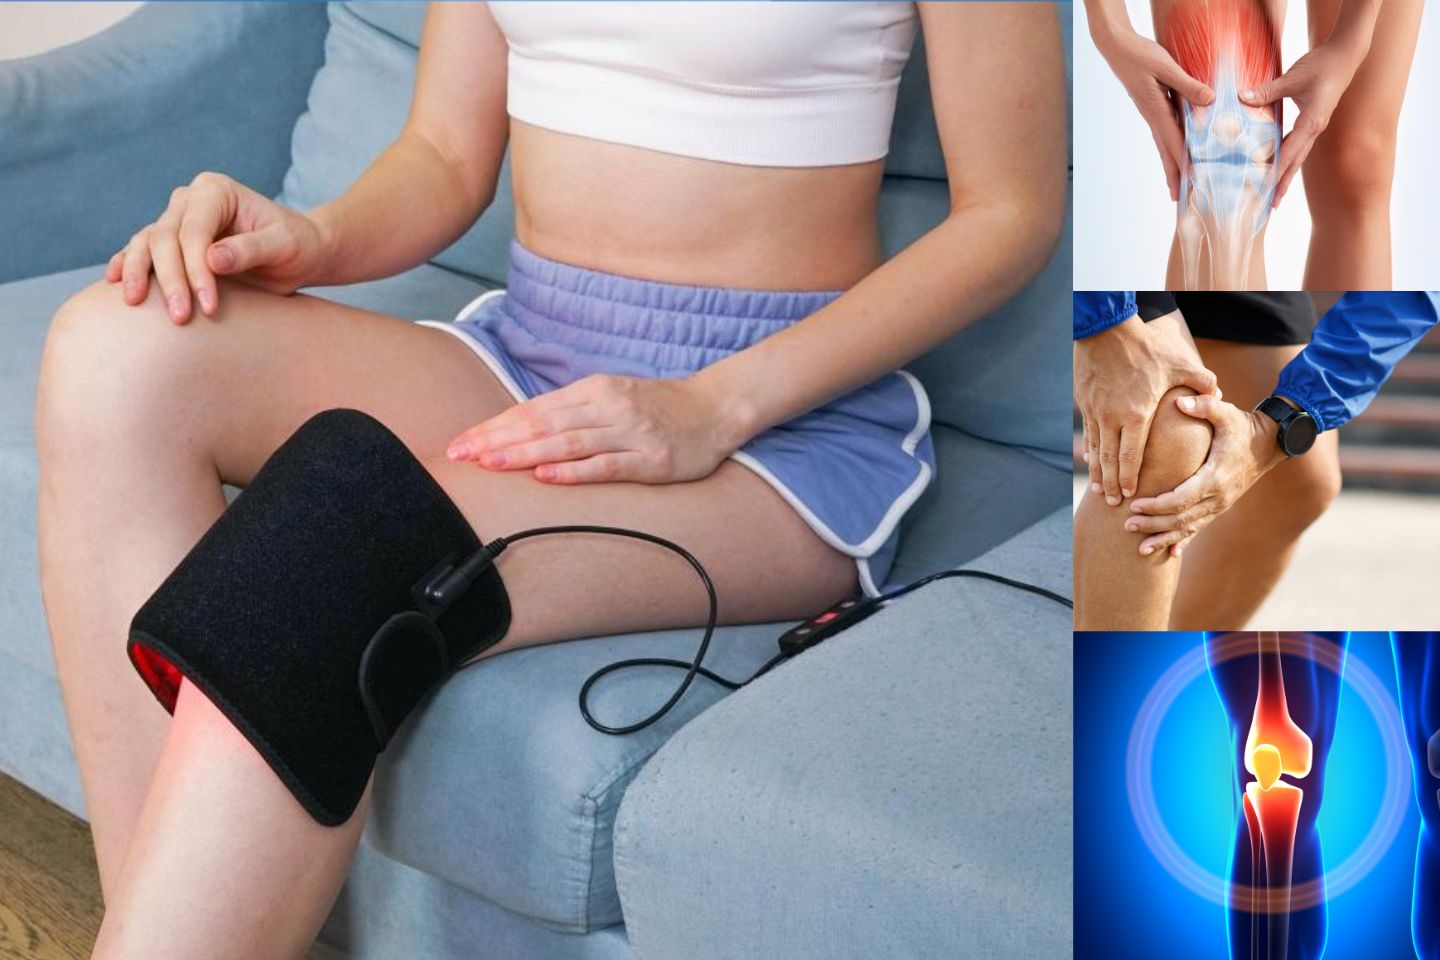 How To Use the Red Light Therapy Belt Effectively At Home